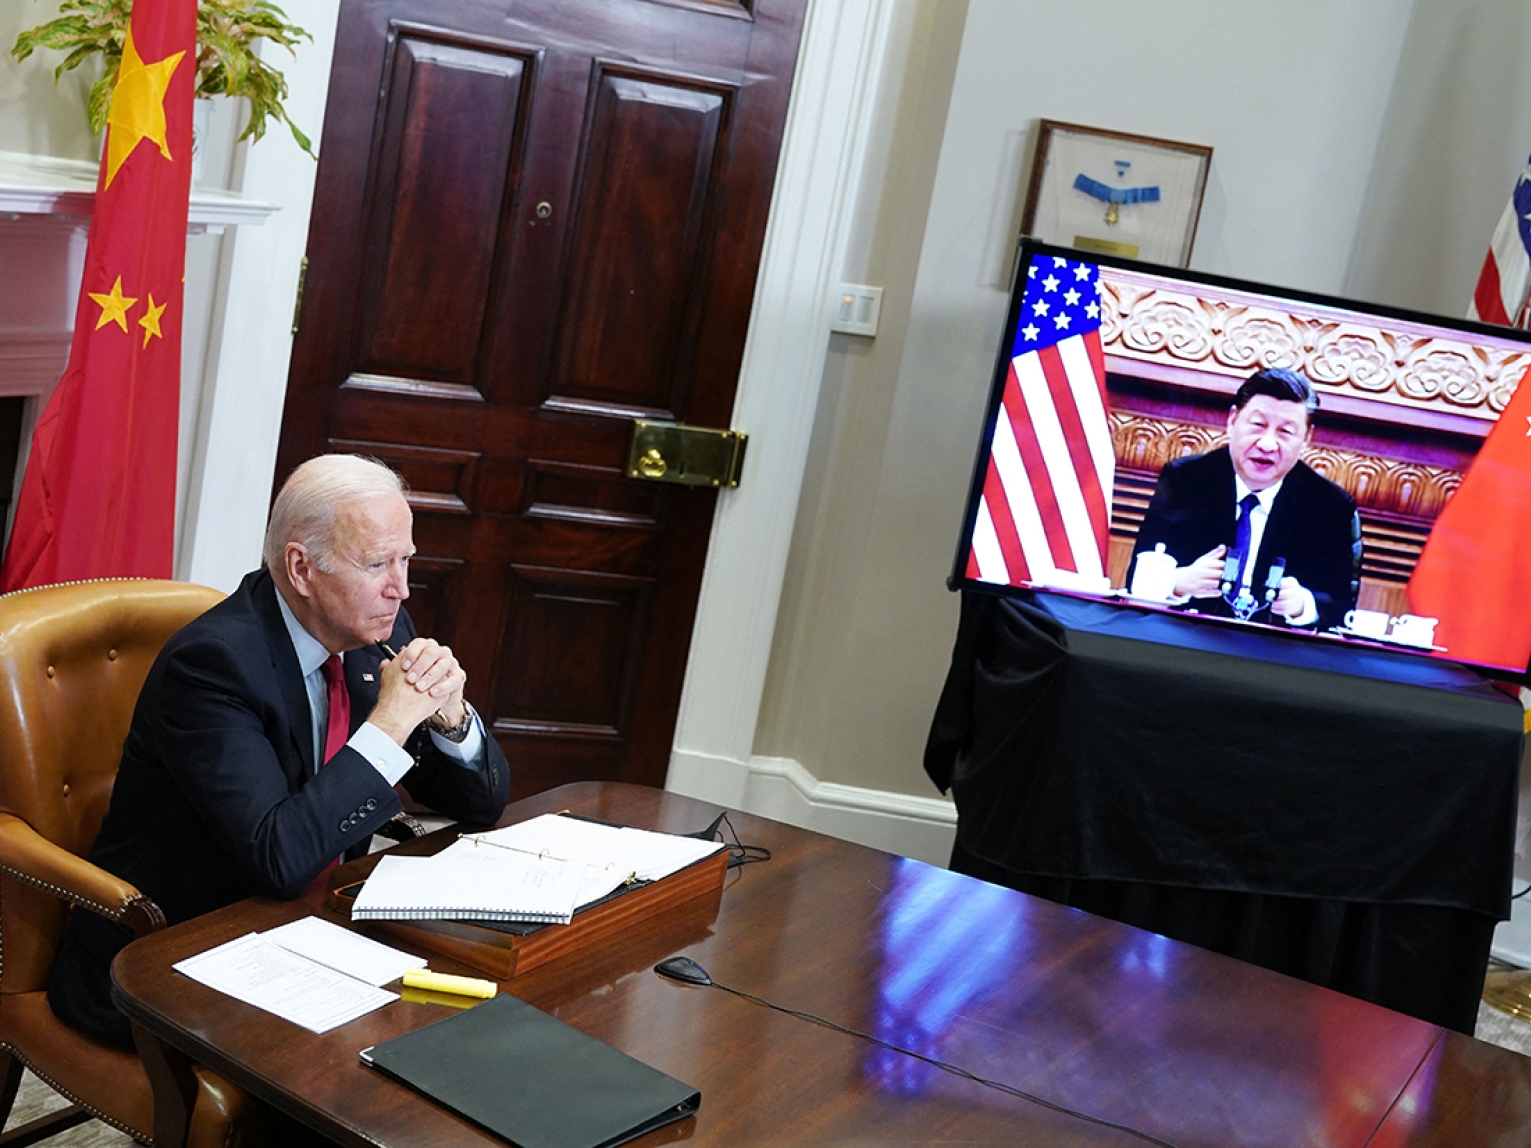 President Joe Biden conducts a virtual meeting with his Chinese counterpart, Xi Jinping